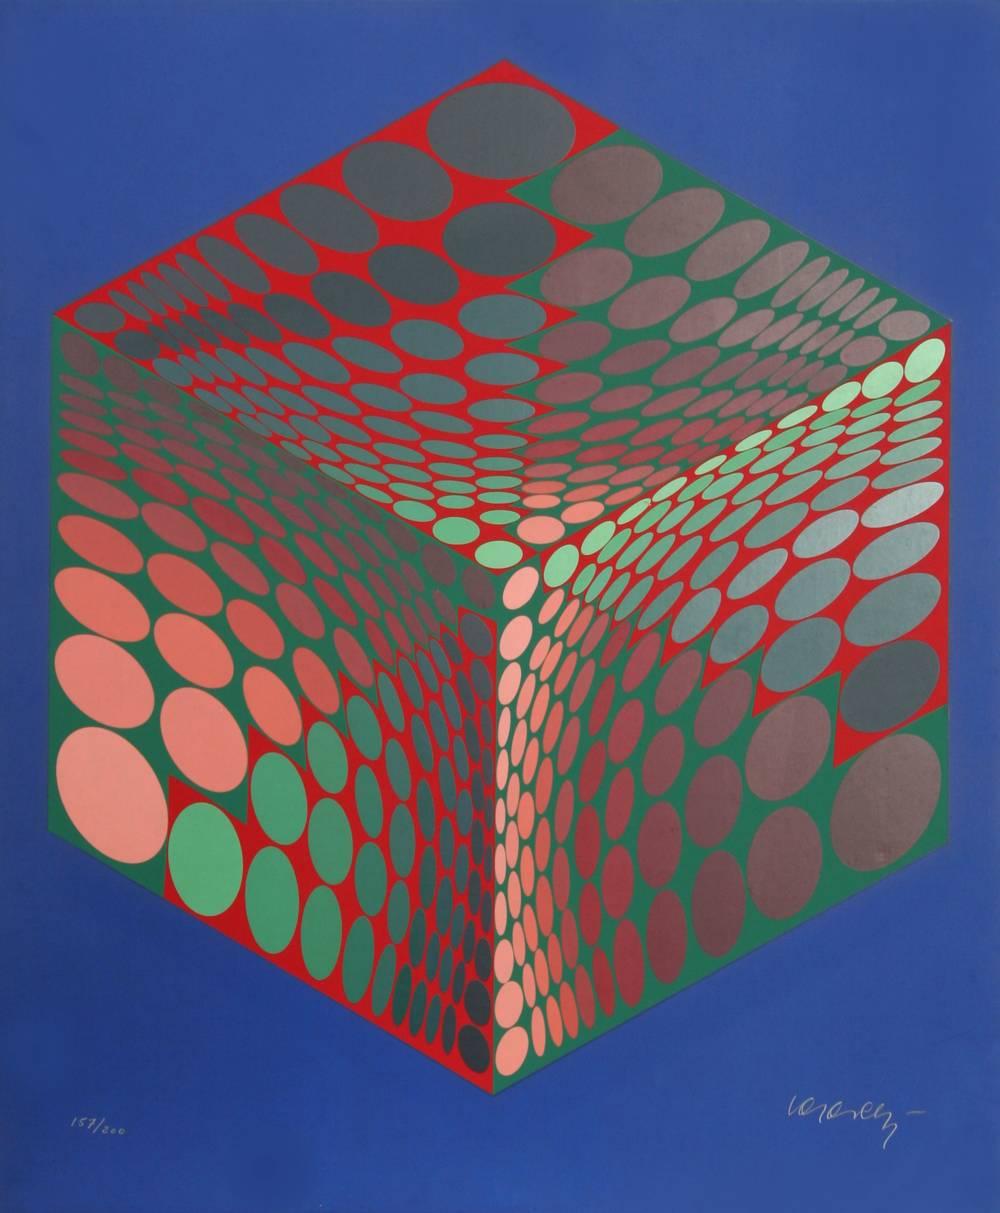 Victor Vasarely Abstract Print - Parmenide (Red, Green, & Blue)